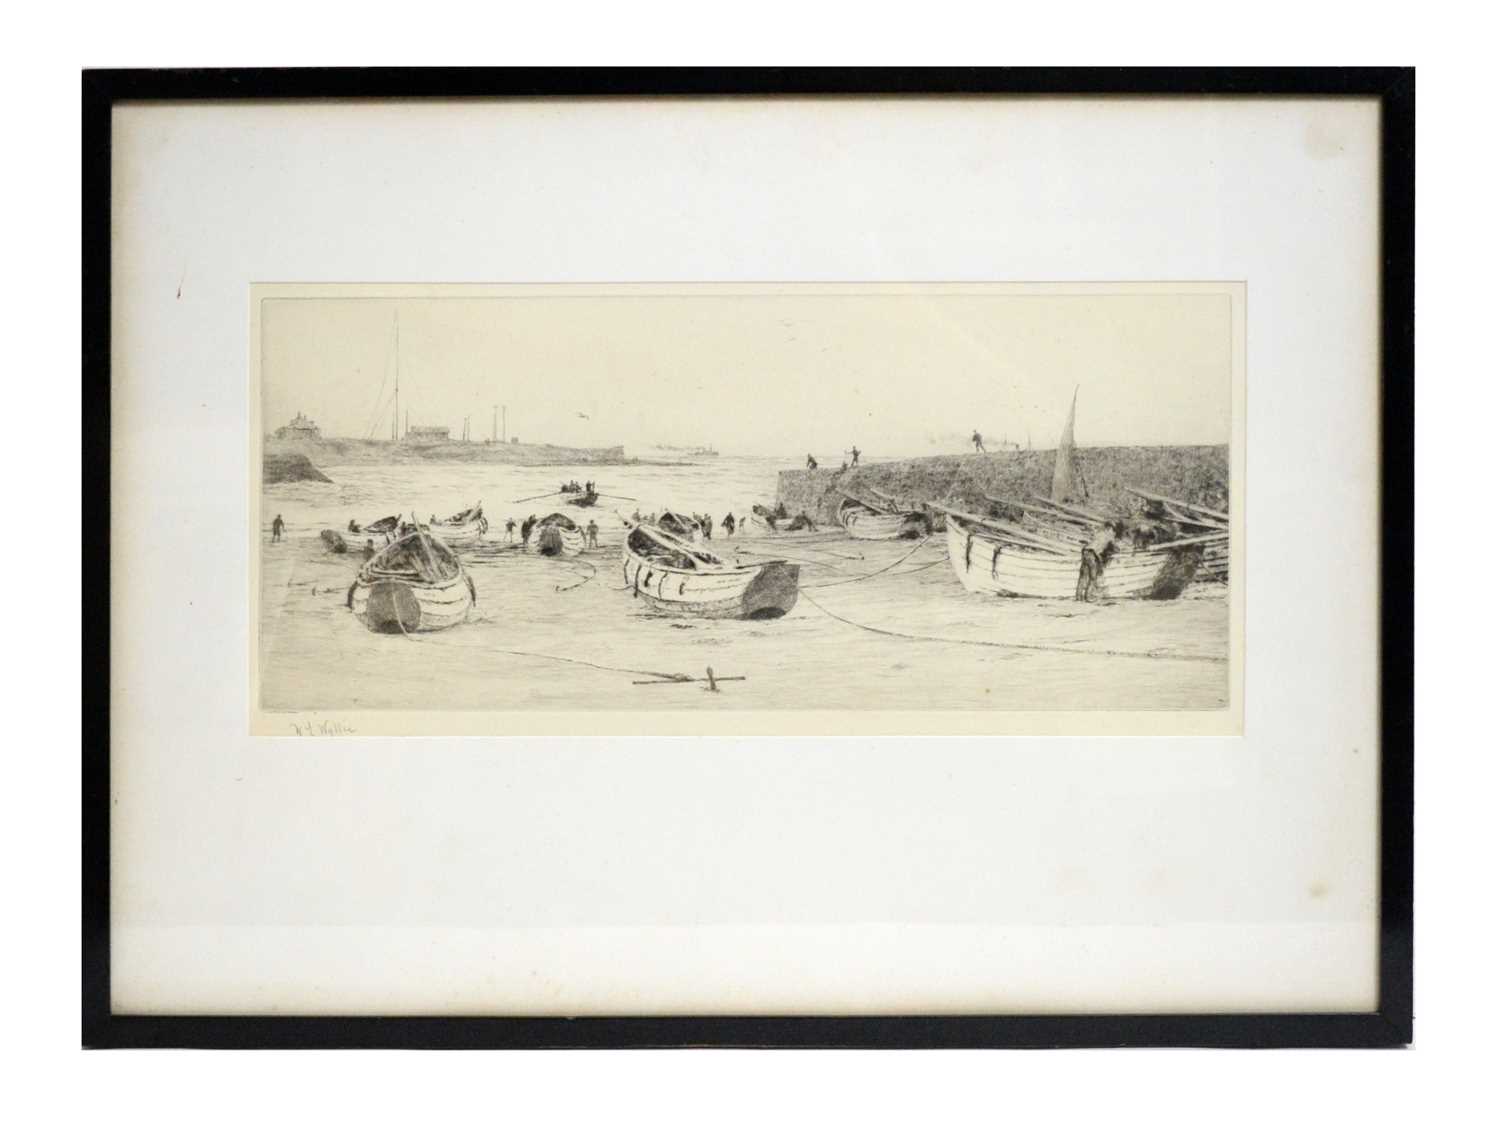 Lot 724 - William Lionel Wyllie - Cullercoats | etching